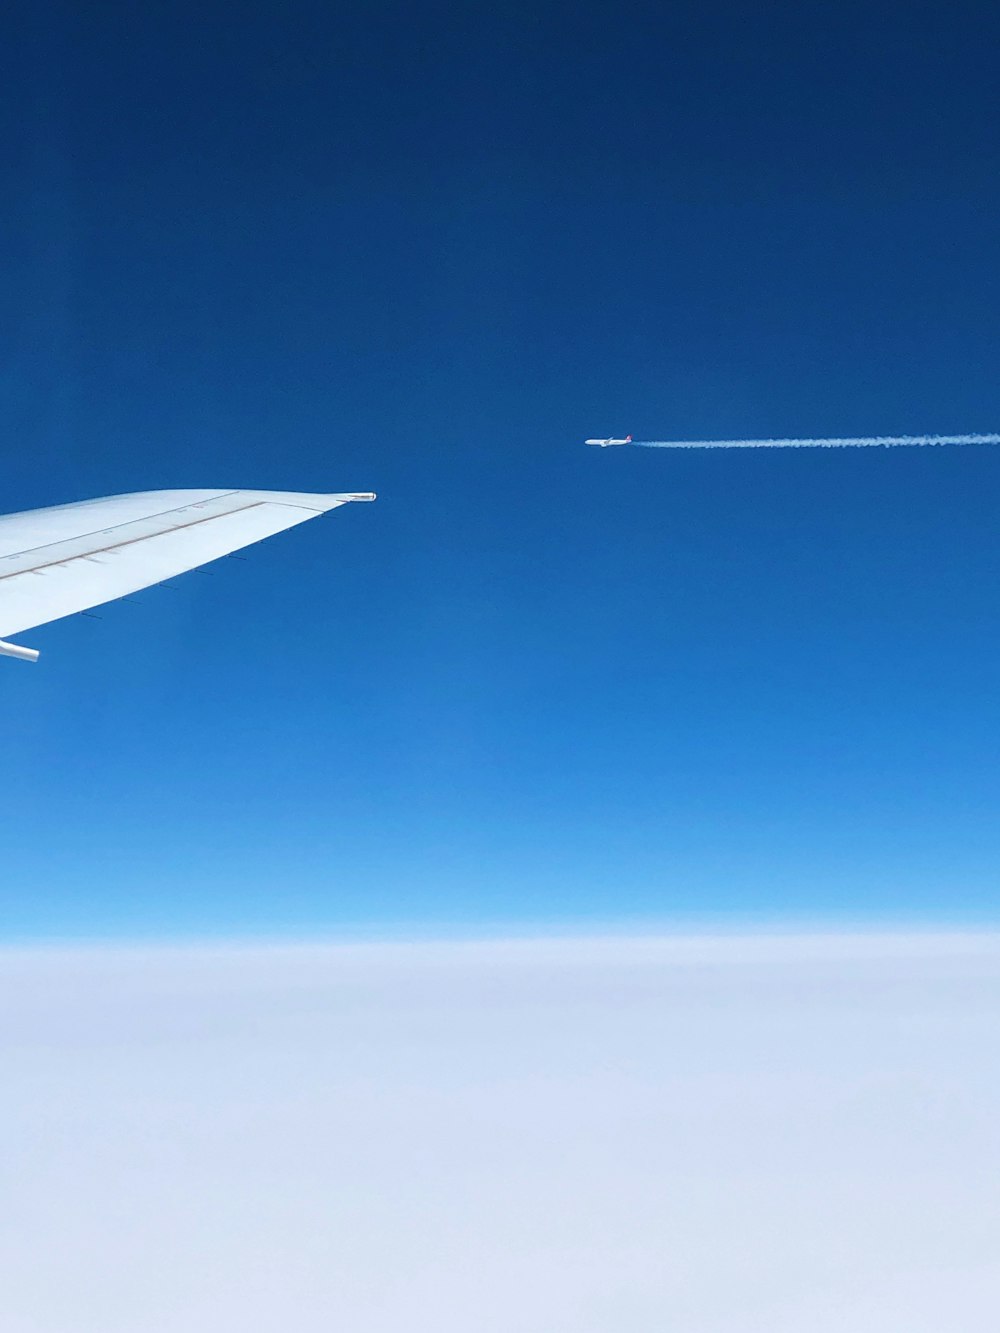 white airplane wing under blue sky during daytime